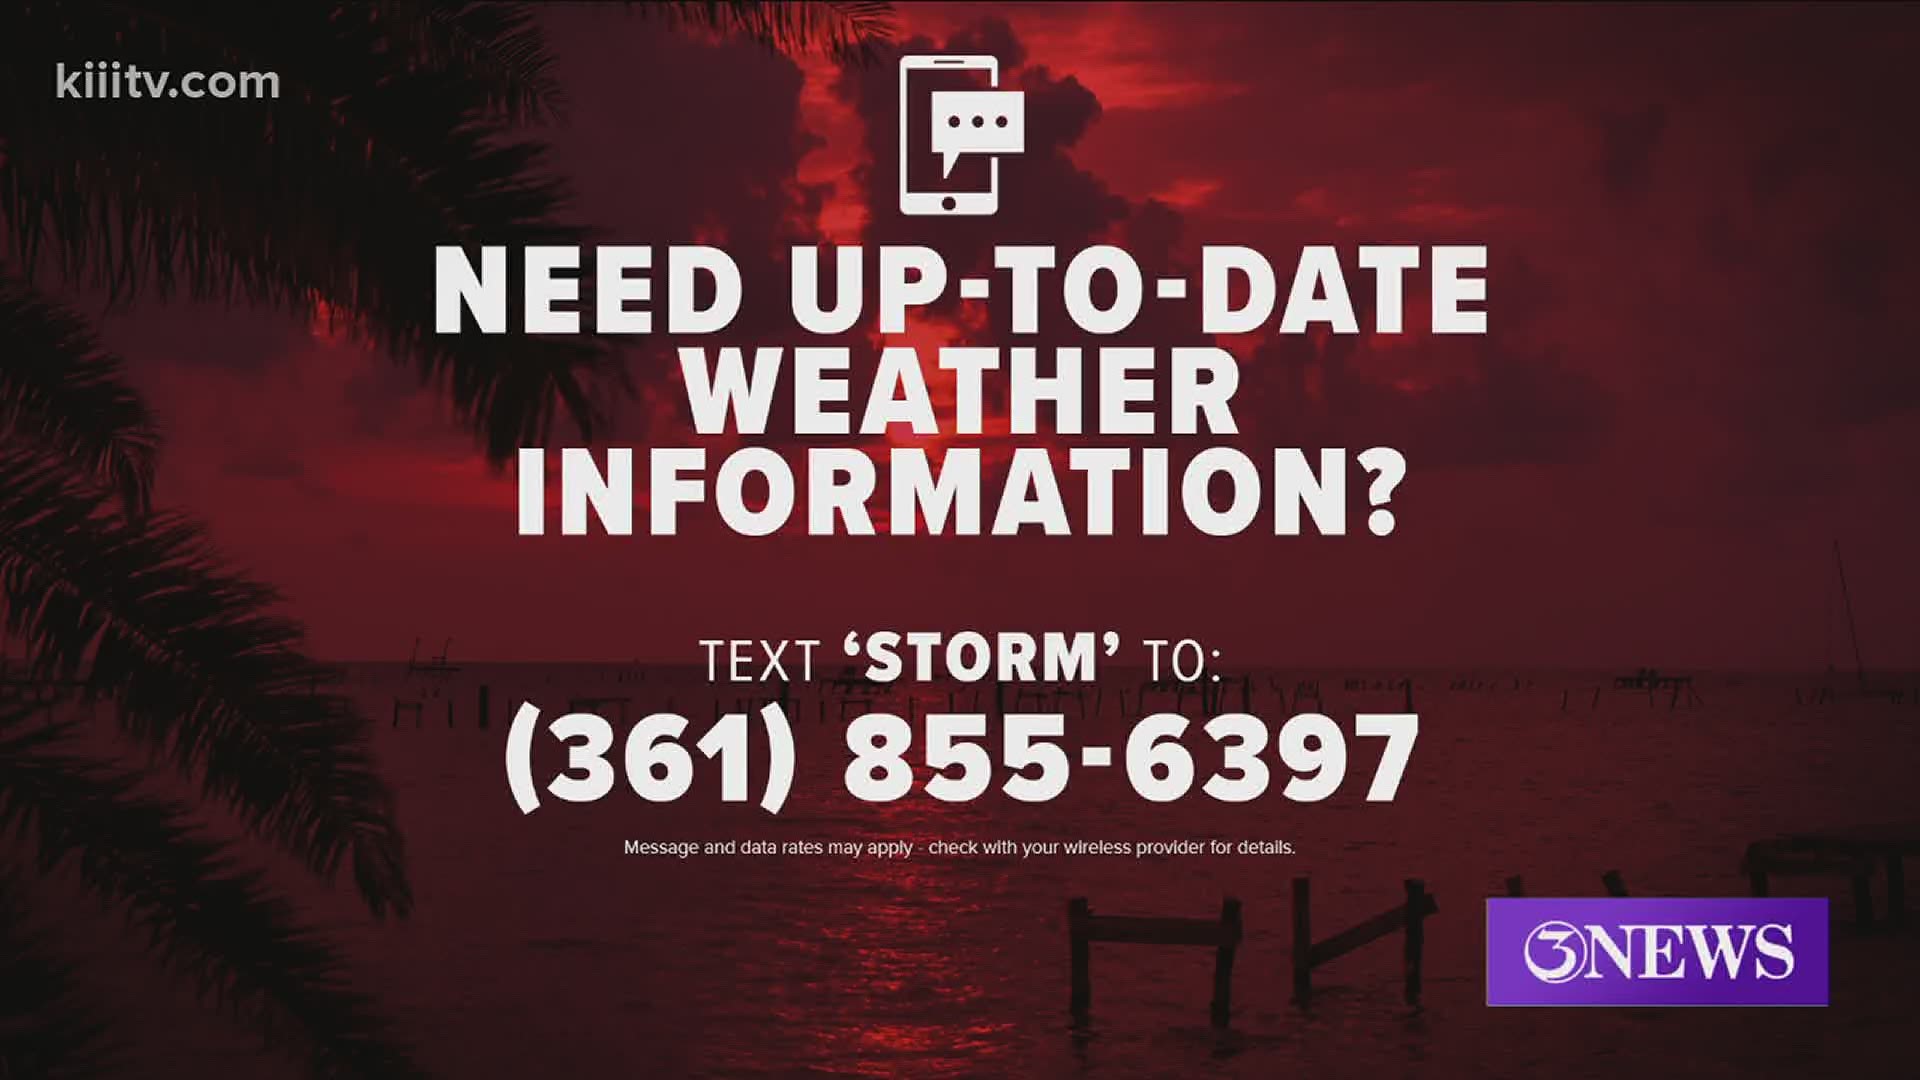 If you have any questions as our team continues to keep an eye on this storm send us a text! our number is 361-855-6397.